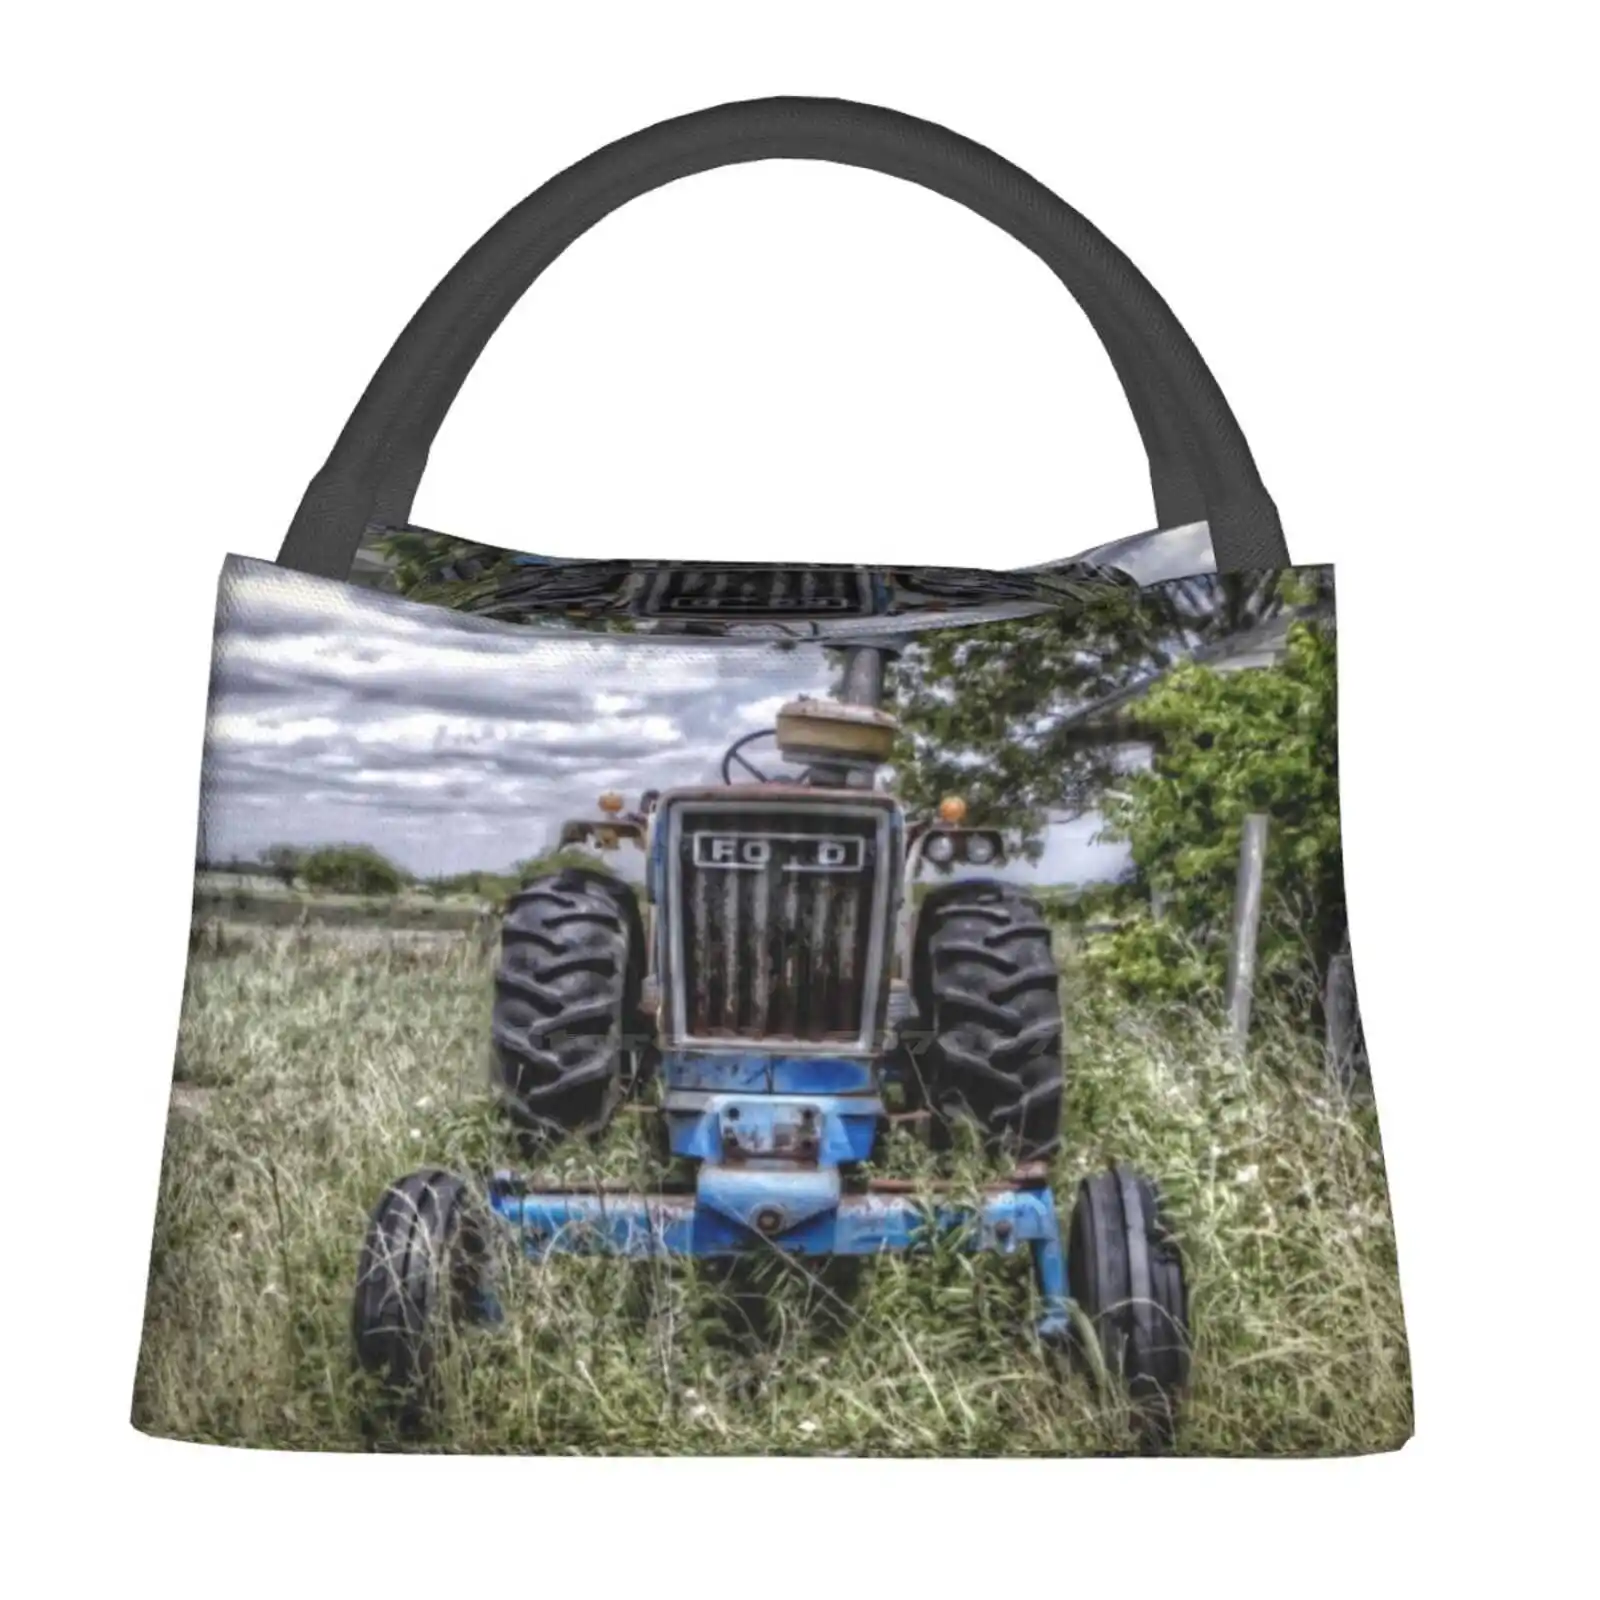 

Vintage Ford 7600 Farm Tractor Portable Lunch Bag Insulated Bag Antique Tractors Machinery Tractors Farm Tractor Old Texas